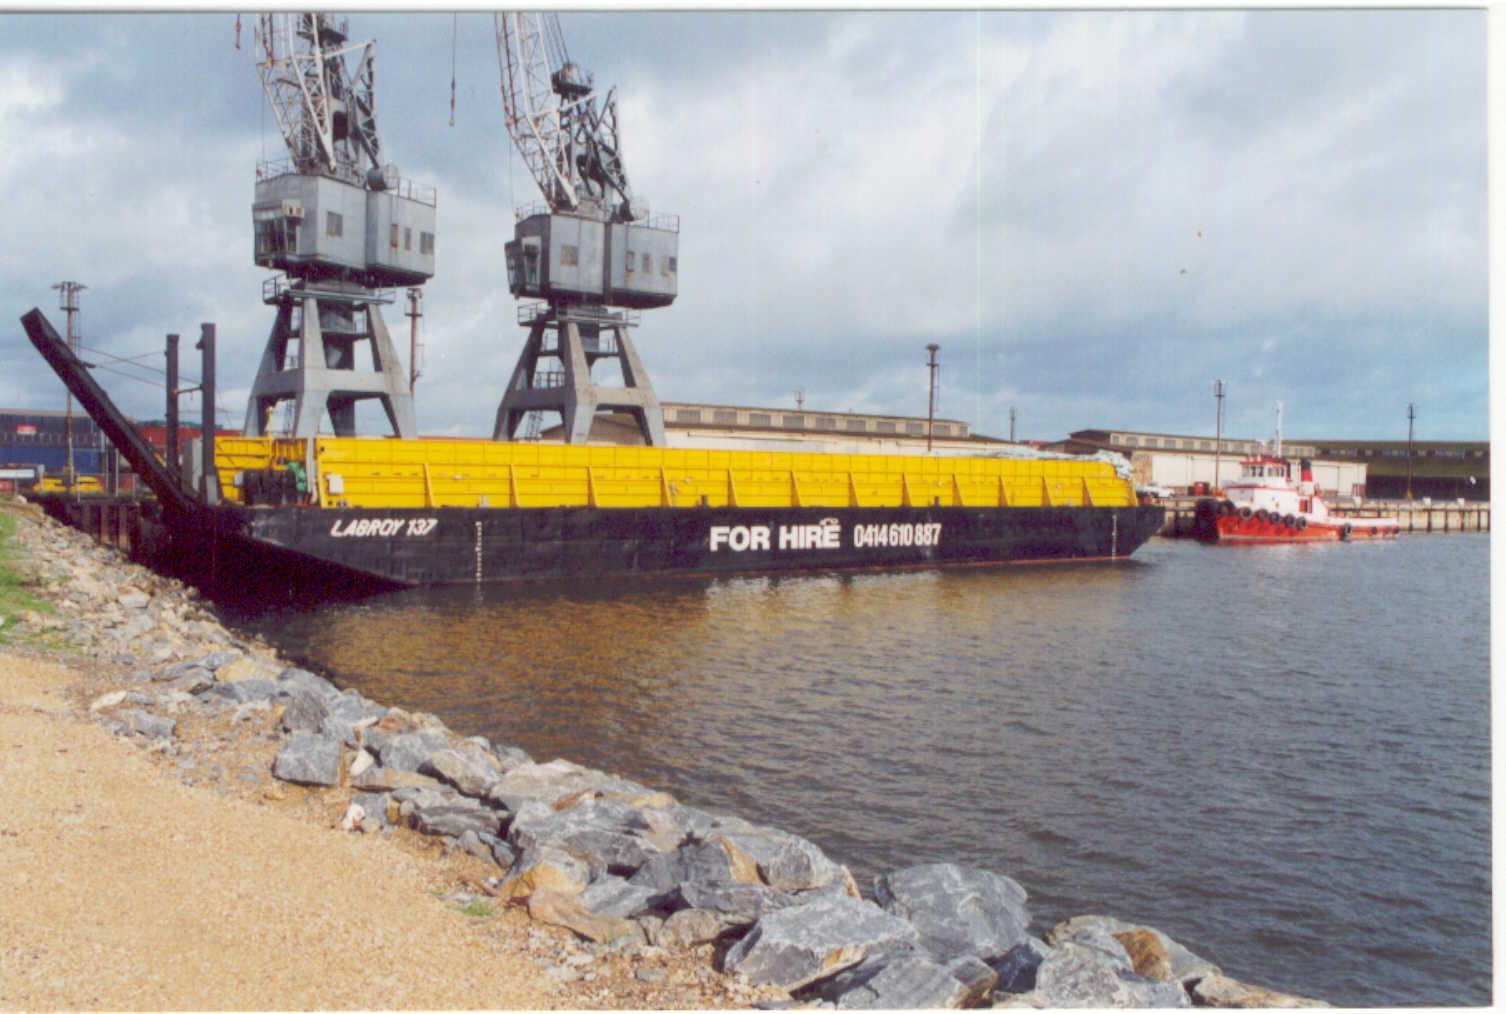 With hire barge at Port Adelaide, June 2001